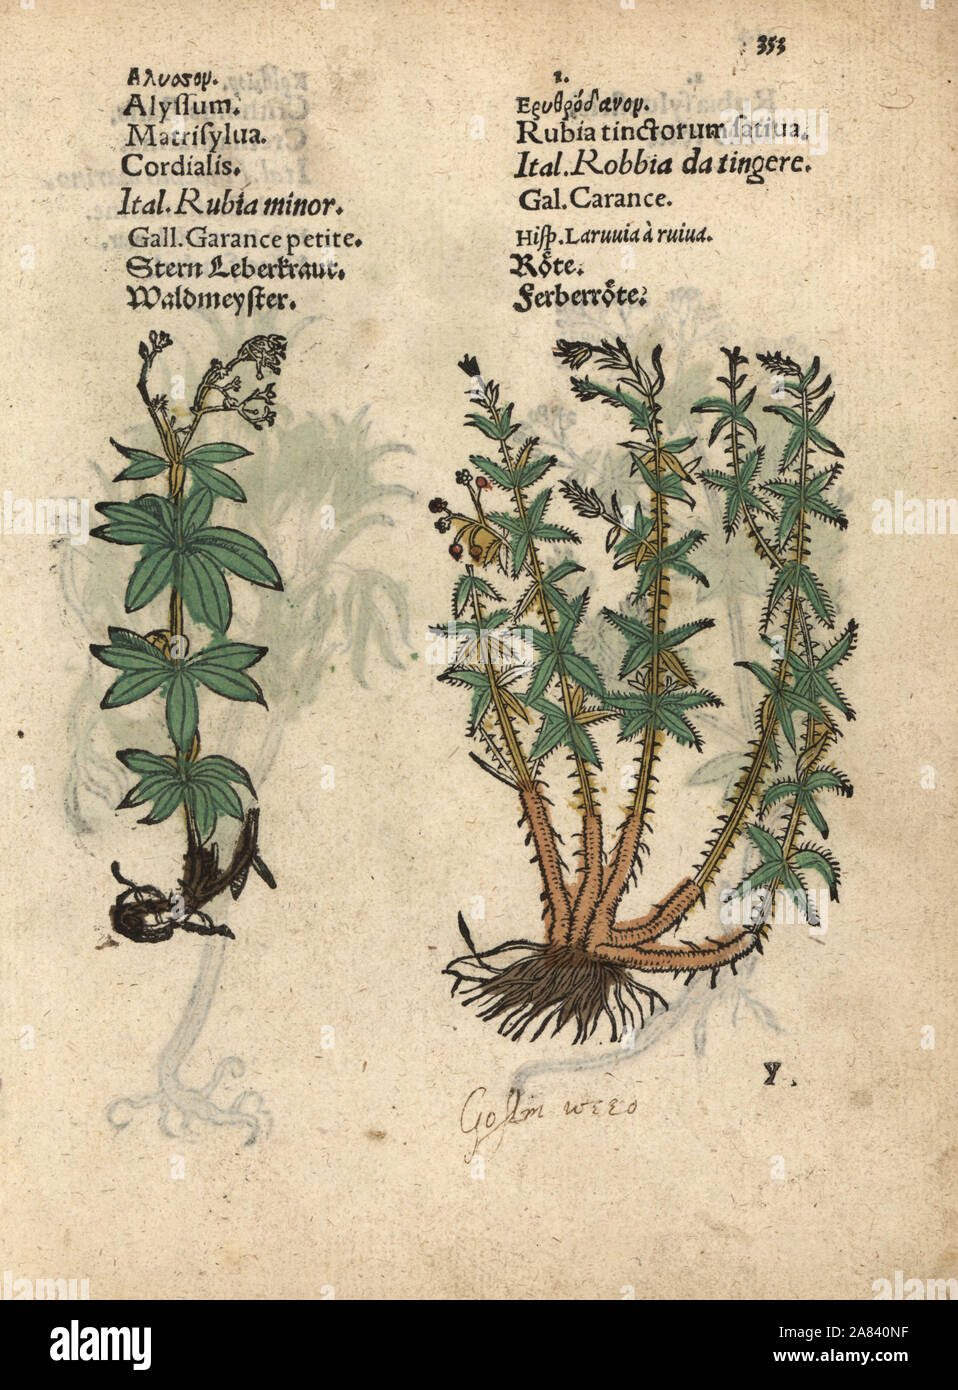 Sweetscented bedstraw, Galium odoratum, and dyer's madder, Rubia tinctorum. Handcoloured woodblock engraving of a botanical illustration from Adam Lonicer's Krauterbuch, or Herbal, Frankfurt, 1557. This from a 17th century pirate edition or atlas of illustrations only, with captions in Latin, Greek, French, Italian, German, and in English manuscript. Stock Photo